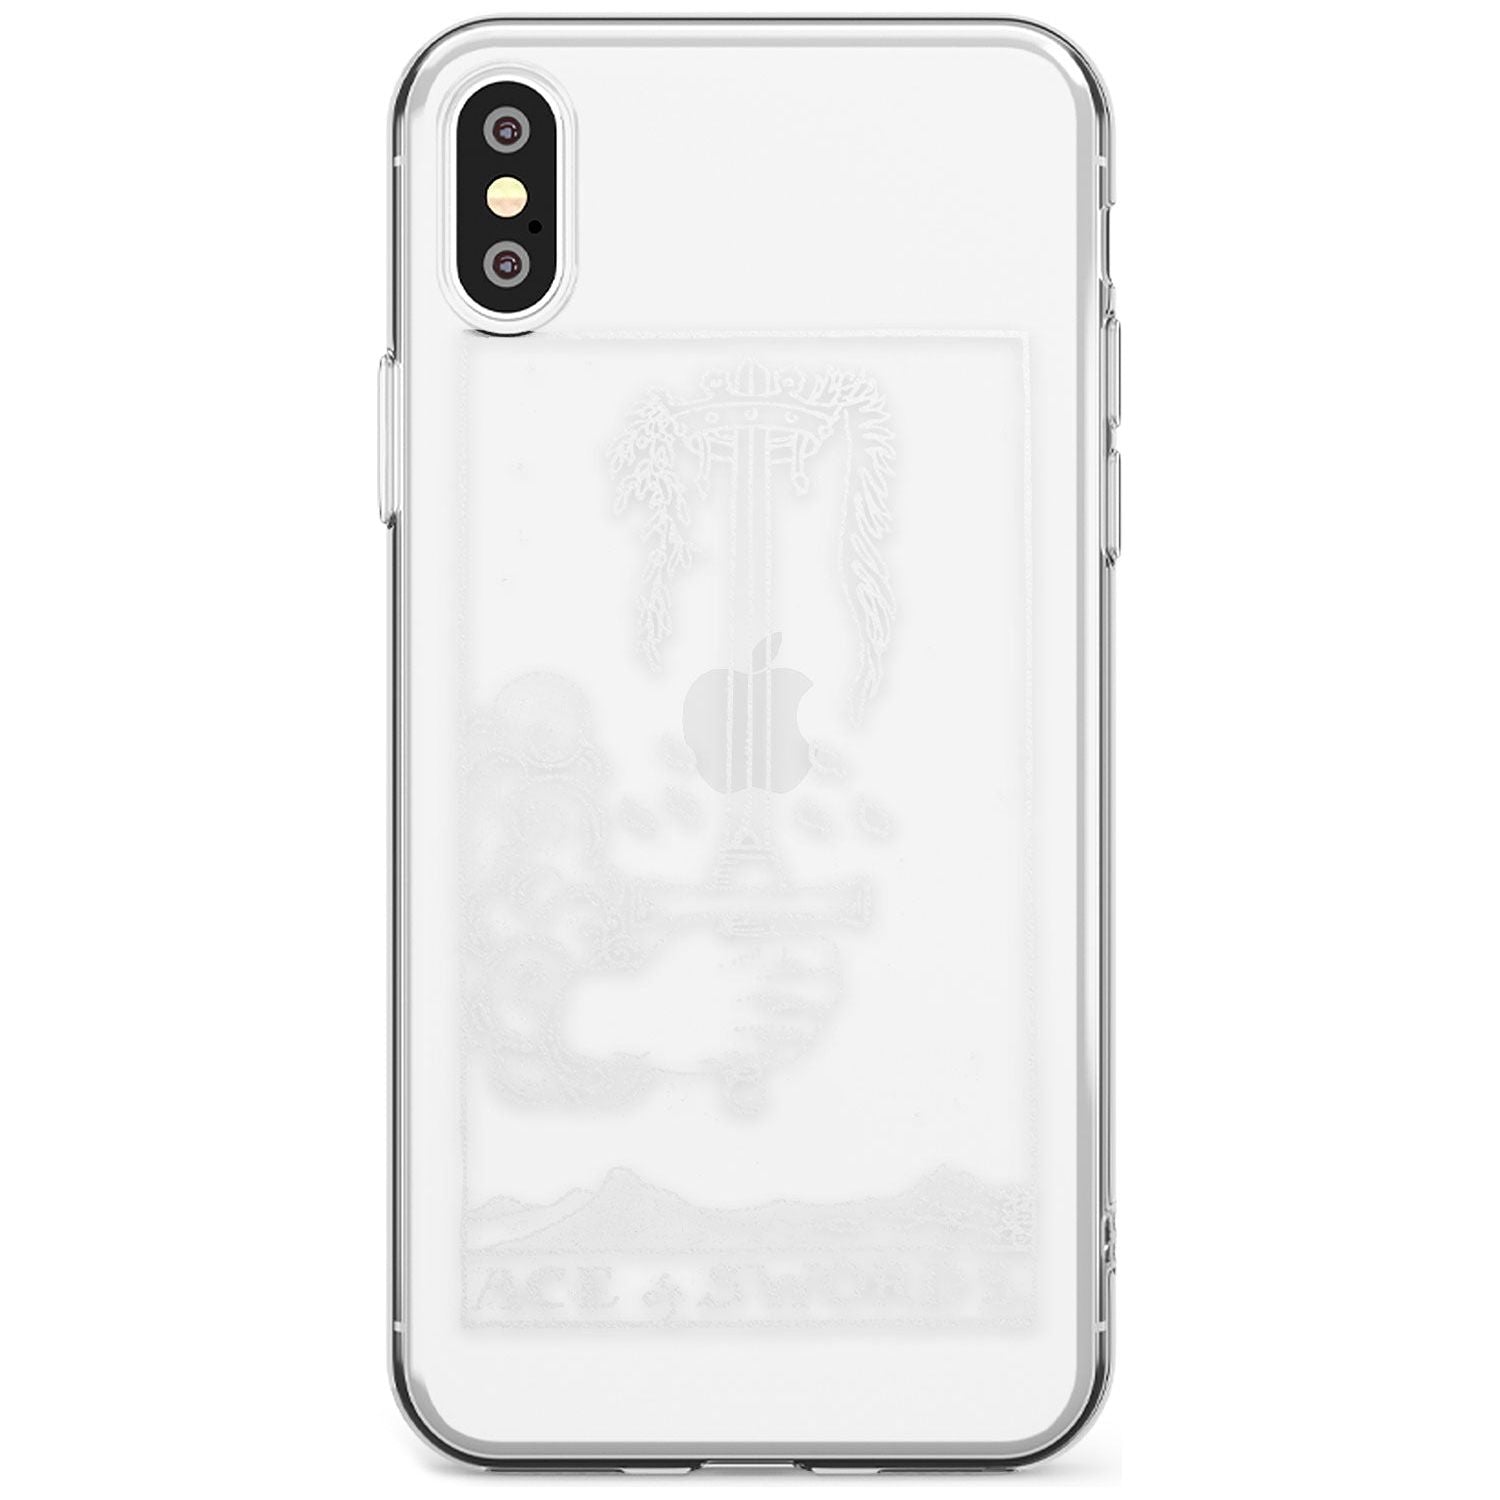 Ace of Swords Tarot Card - White Transparent Black Impact Phone Case for iPhone X XS Max XR